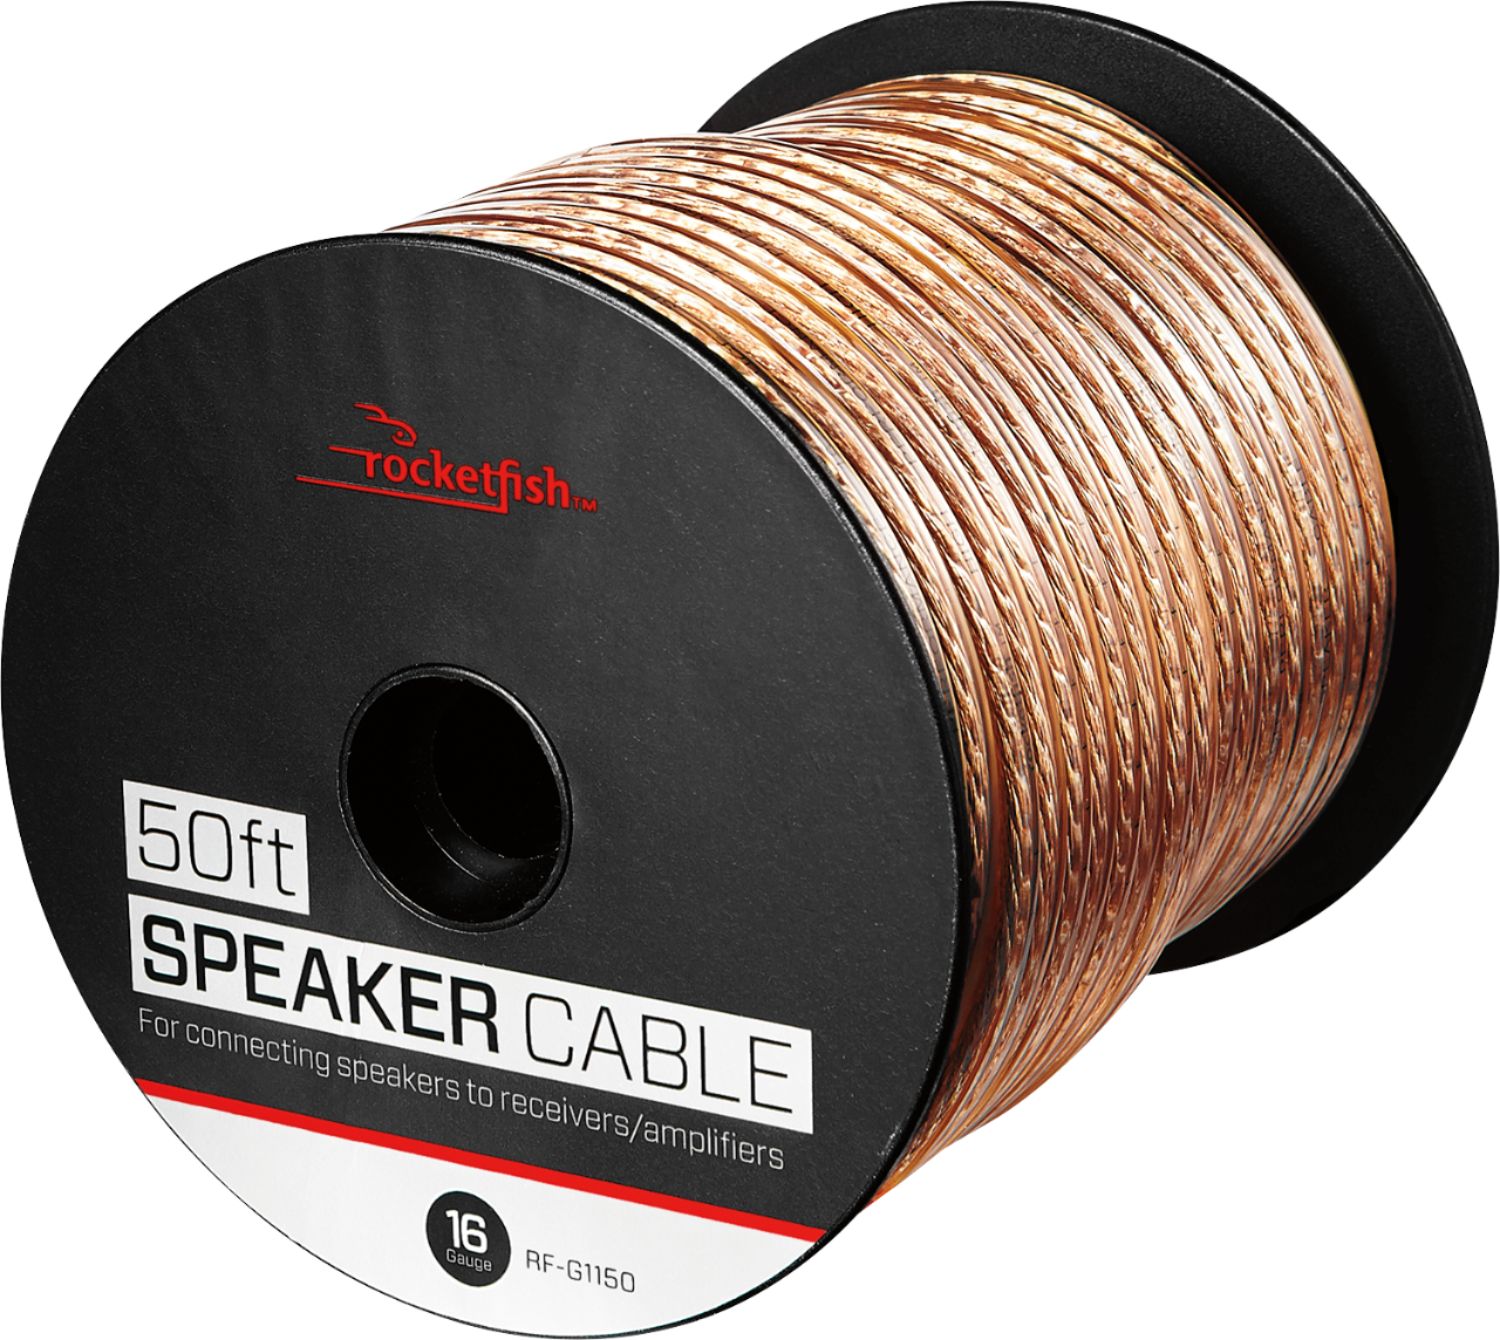 Questions and Answers: Rocketfish™ 50' 16 Gauge Pure Copper Speaker ...